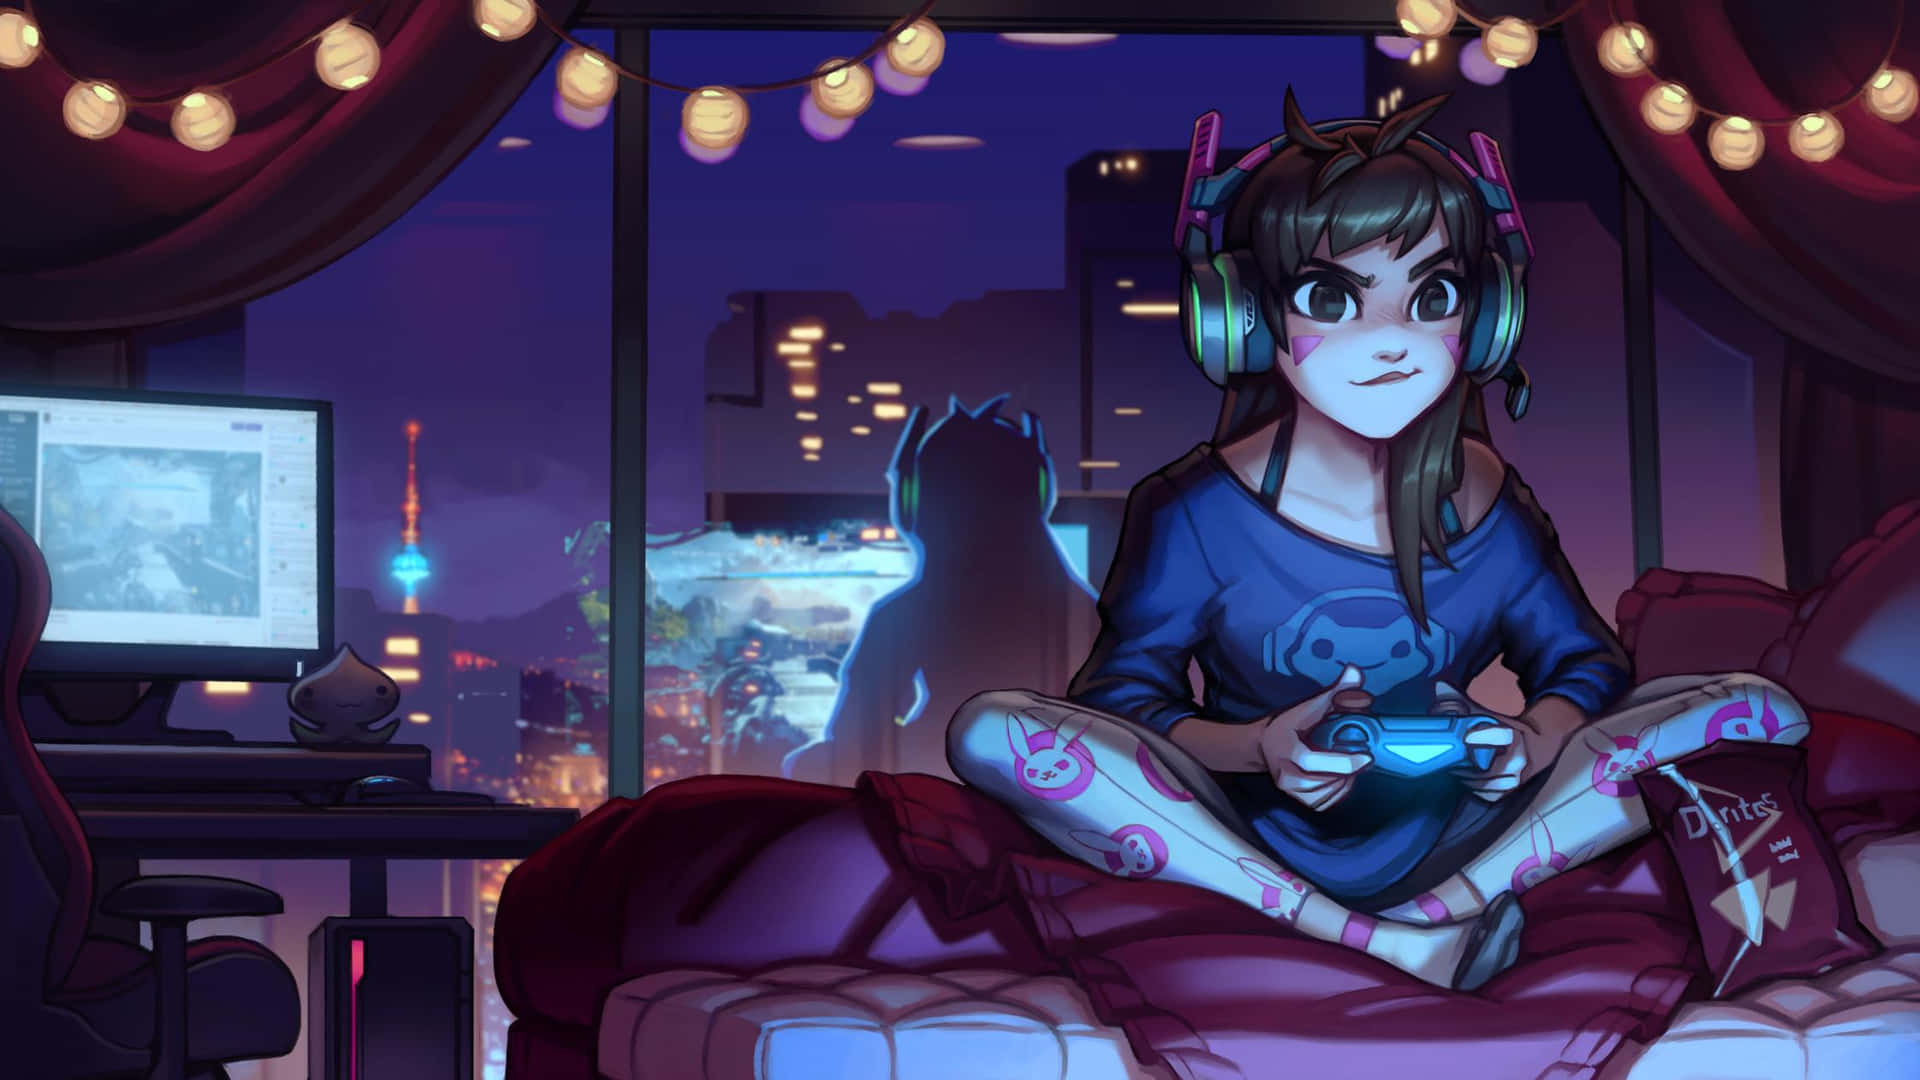 A Girl Sitting On A Bed With A Gaming Controller Wallpaper